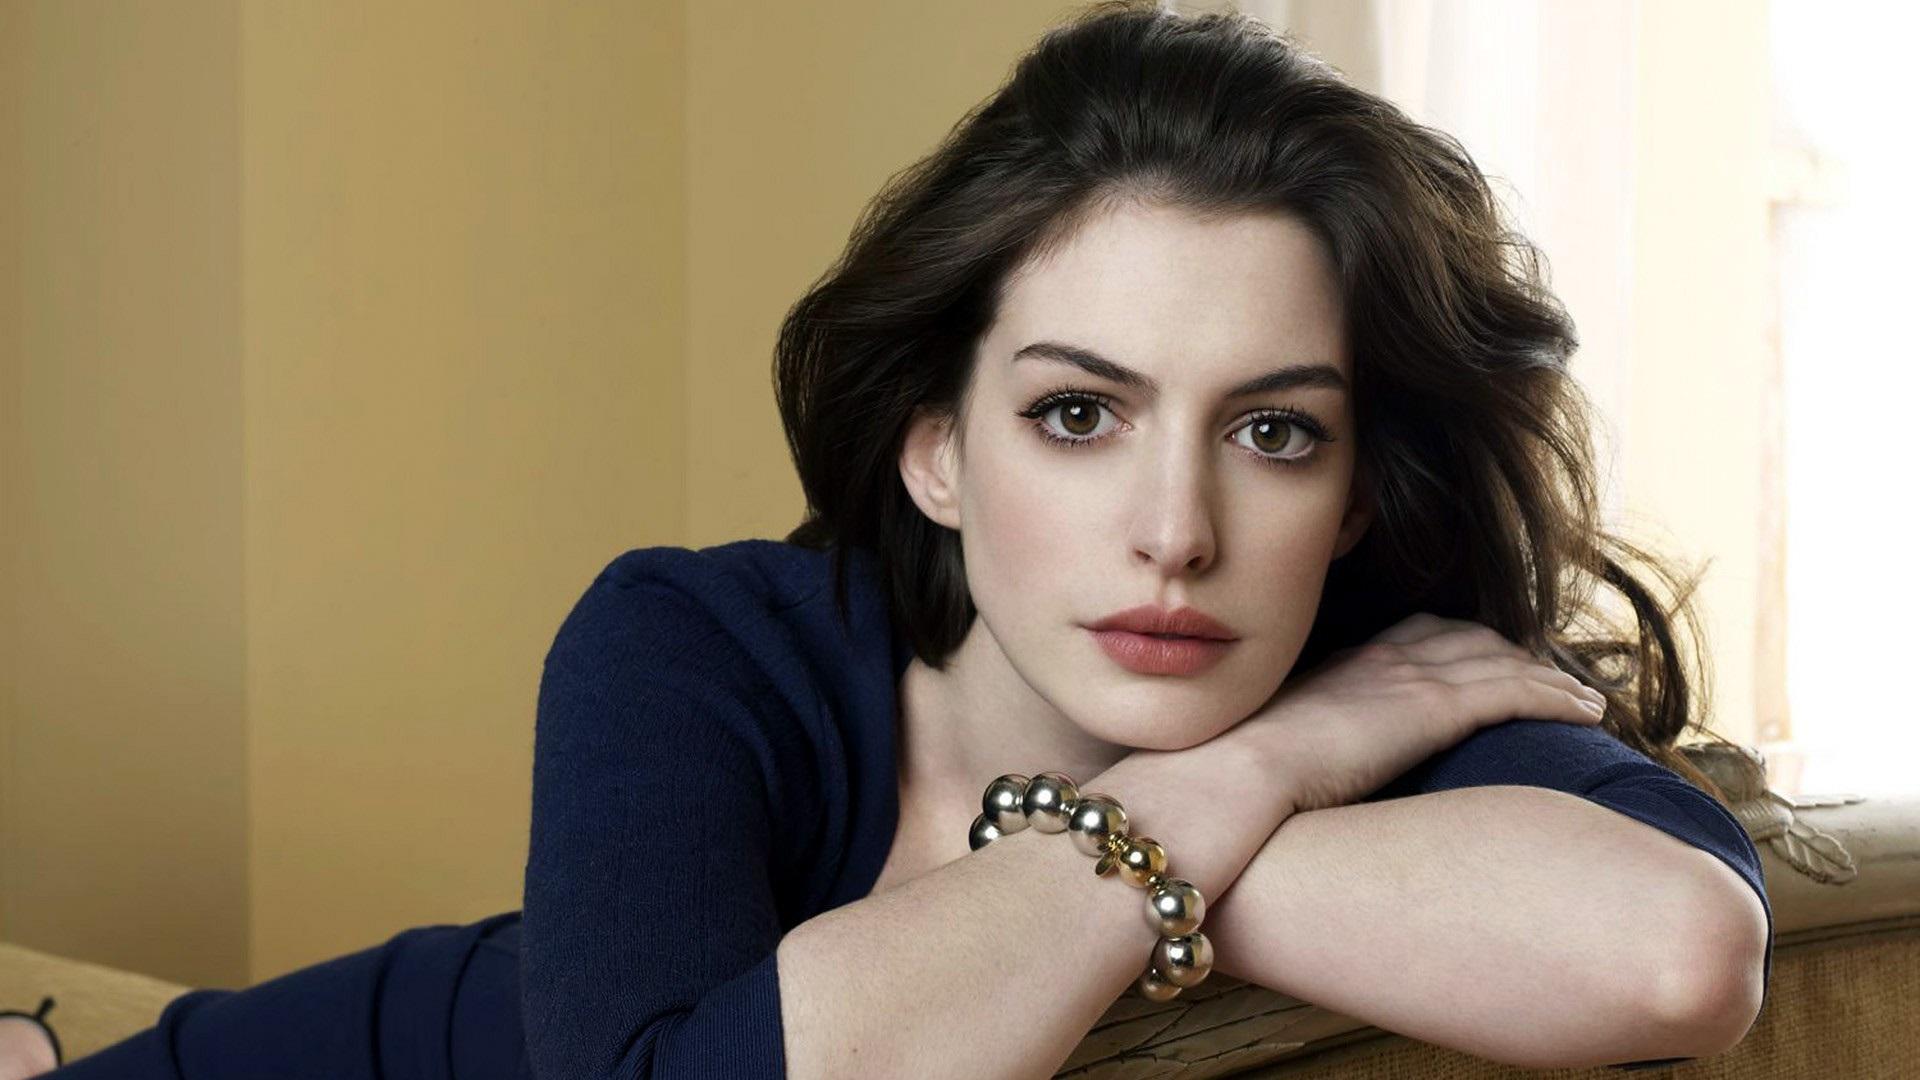 Wallpaper Anne Hathaway 06 1920x1080 Full HD 2K Picture, Image